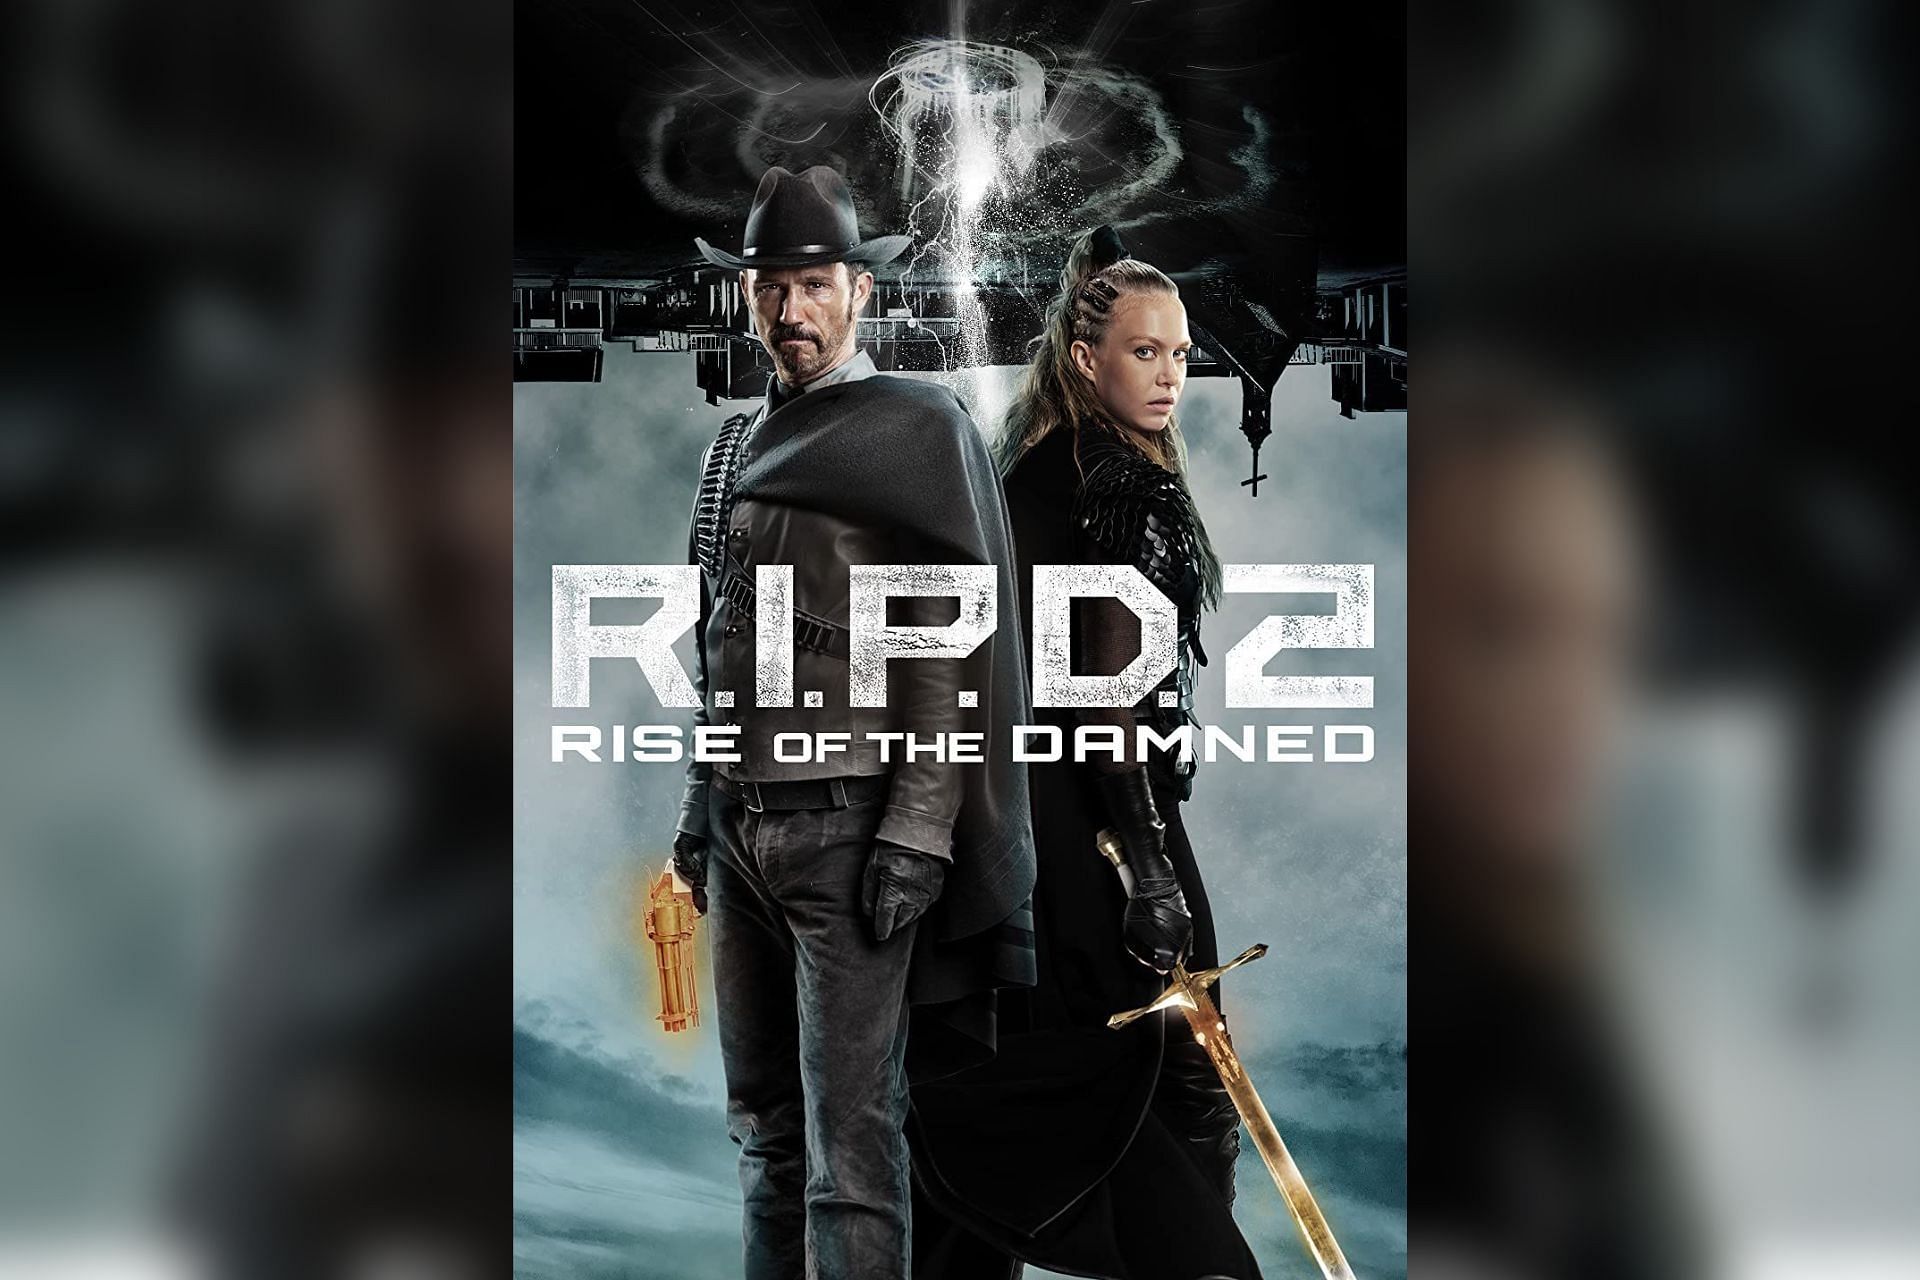 Where Did R.I.P.D. 2: Rise of the Damned Come From?